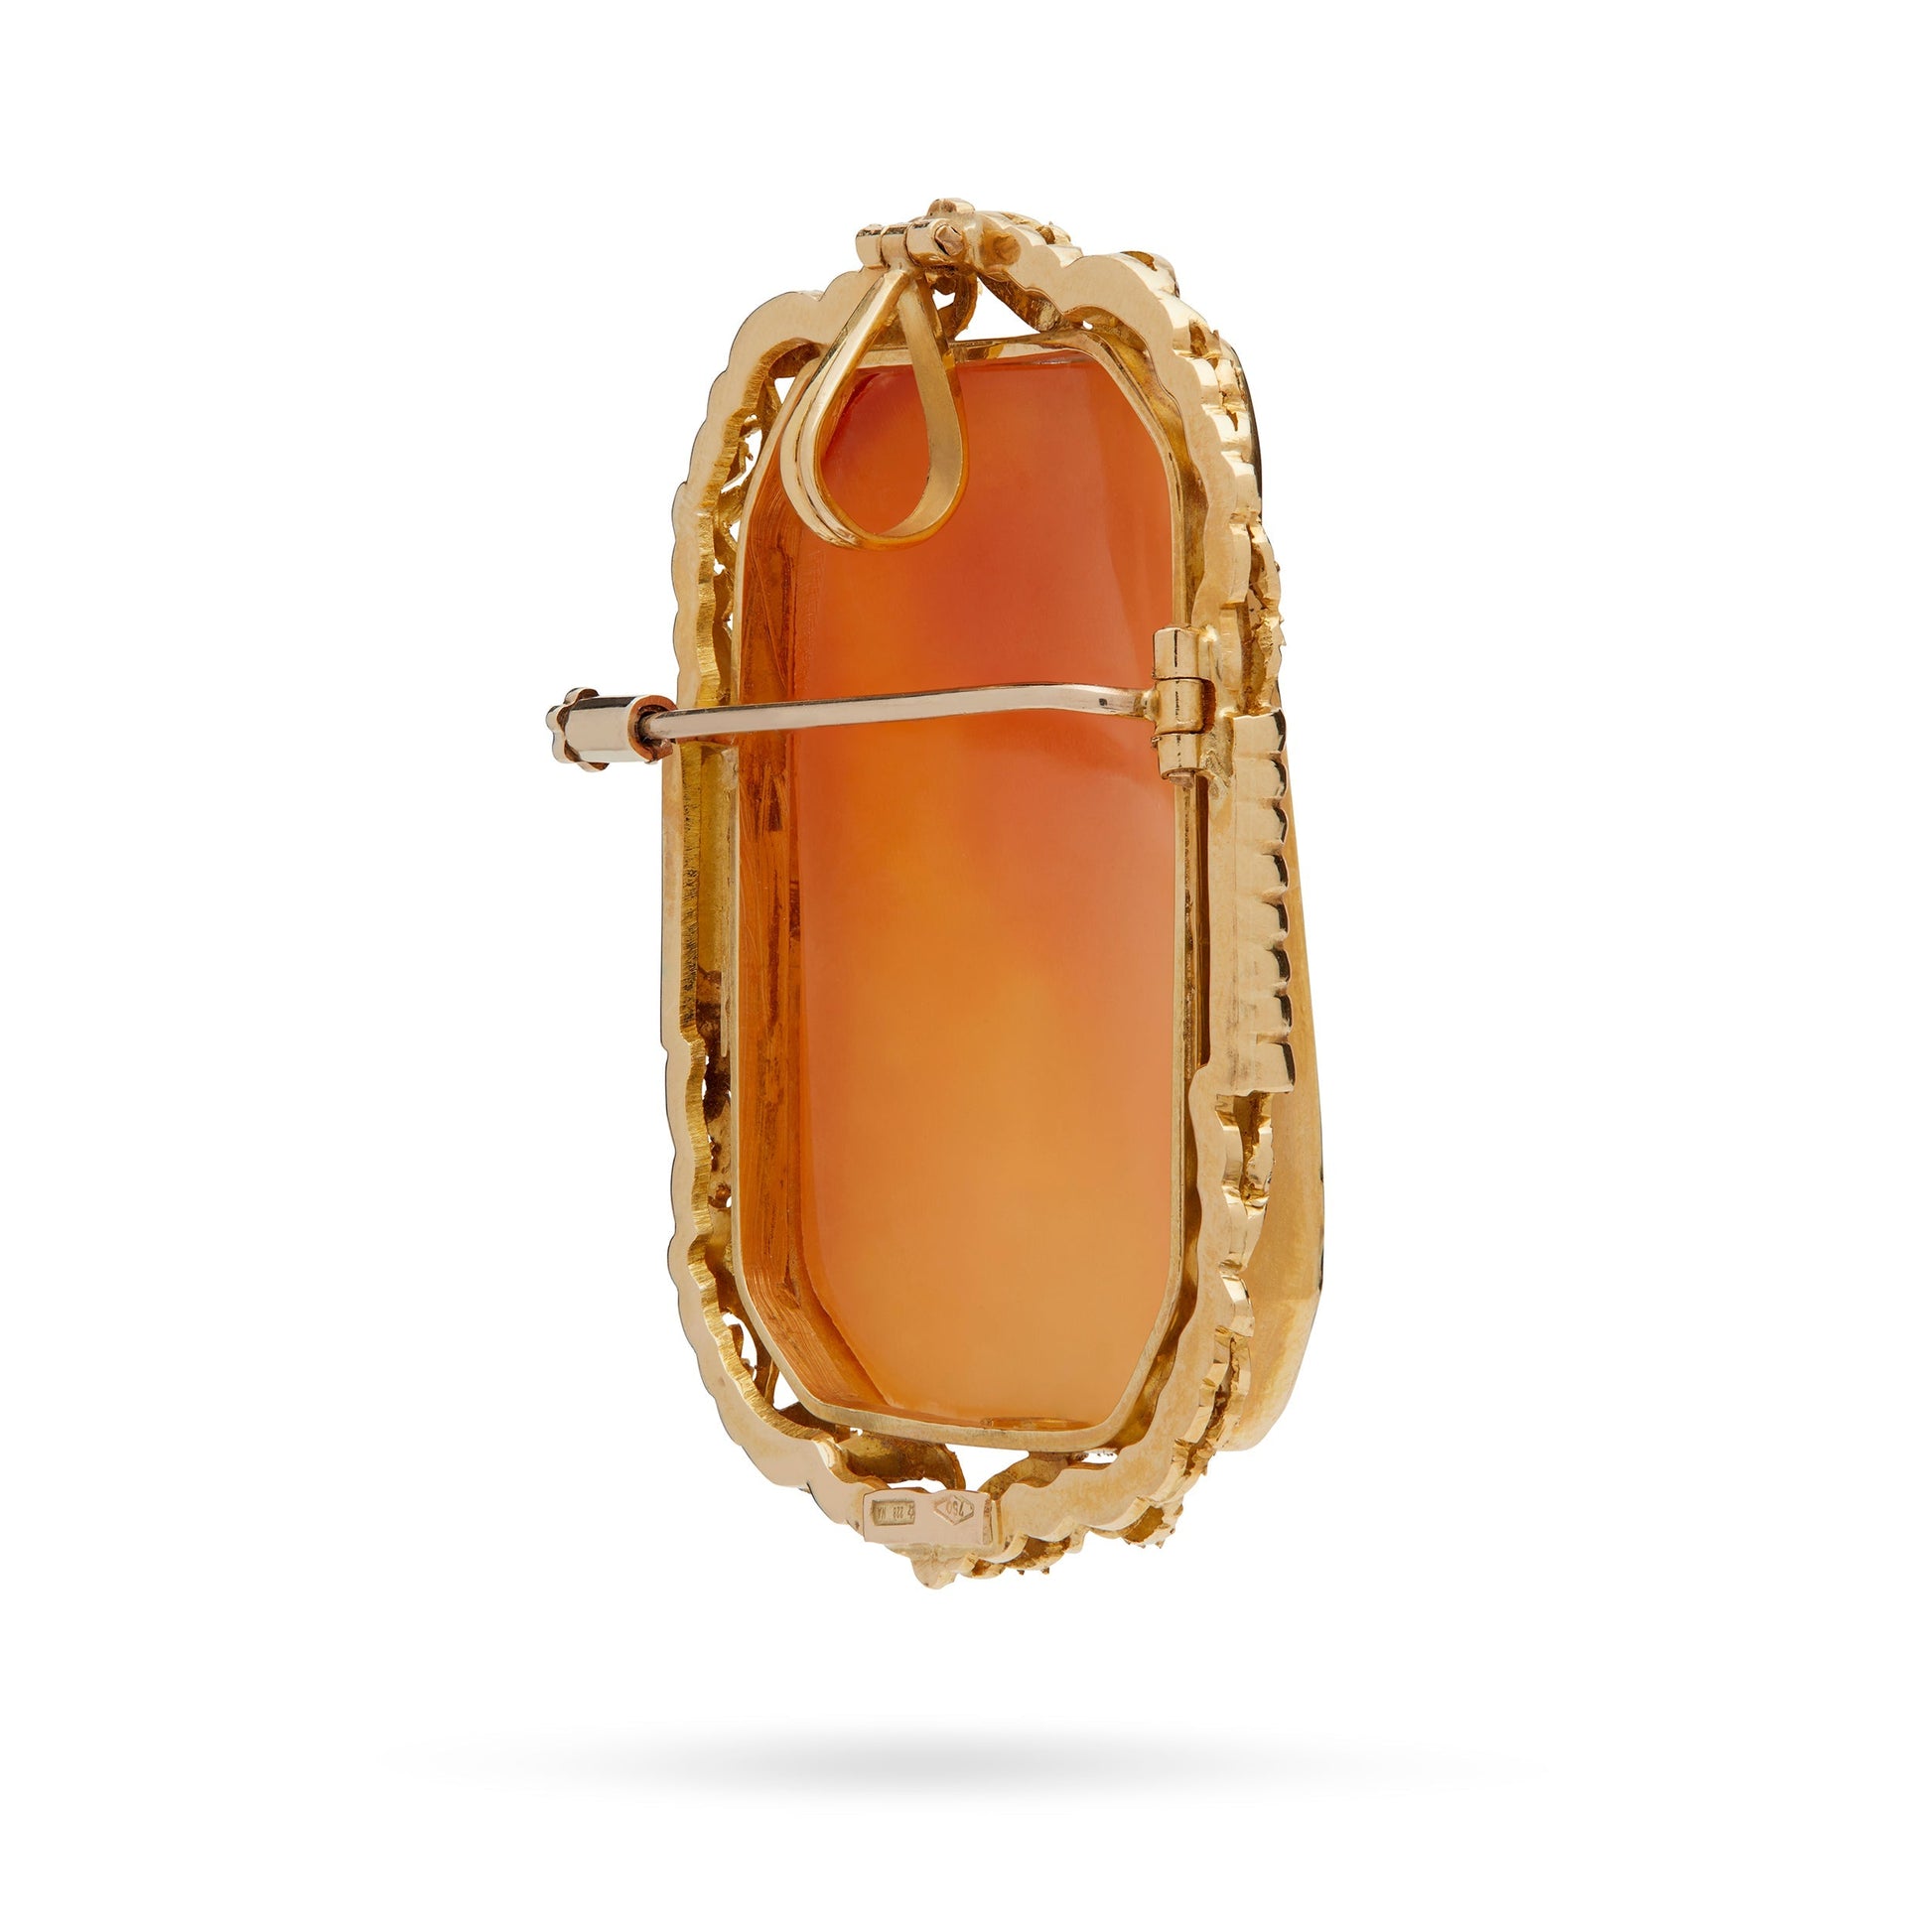 Mondo Cattolico Jewelry Yellow Gold Brooch and Pendant With Cameo Portraying a Woman and Worked Frame